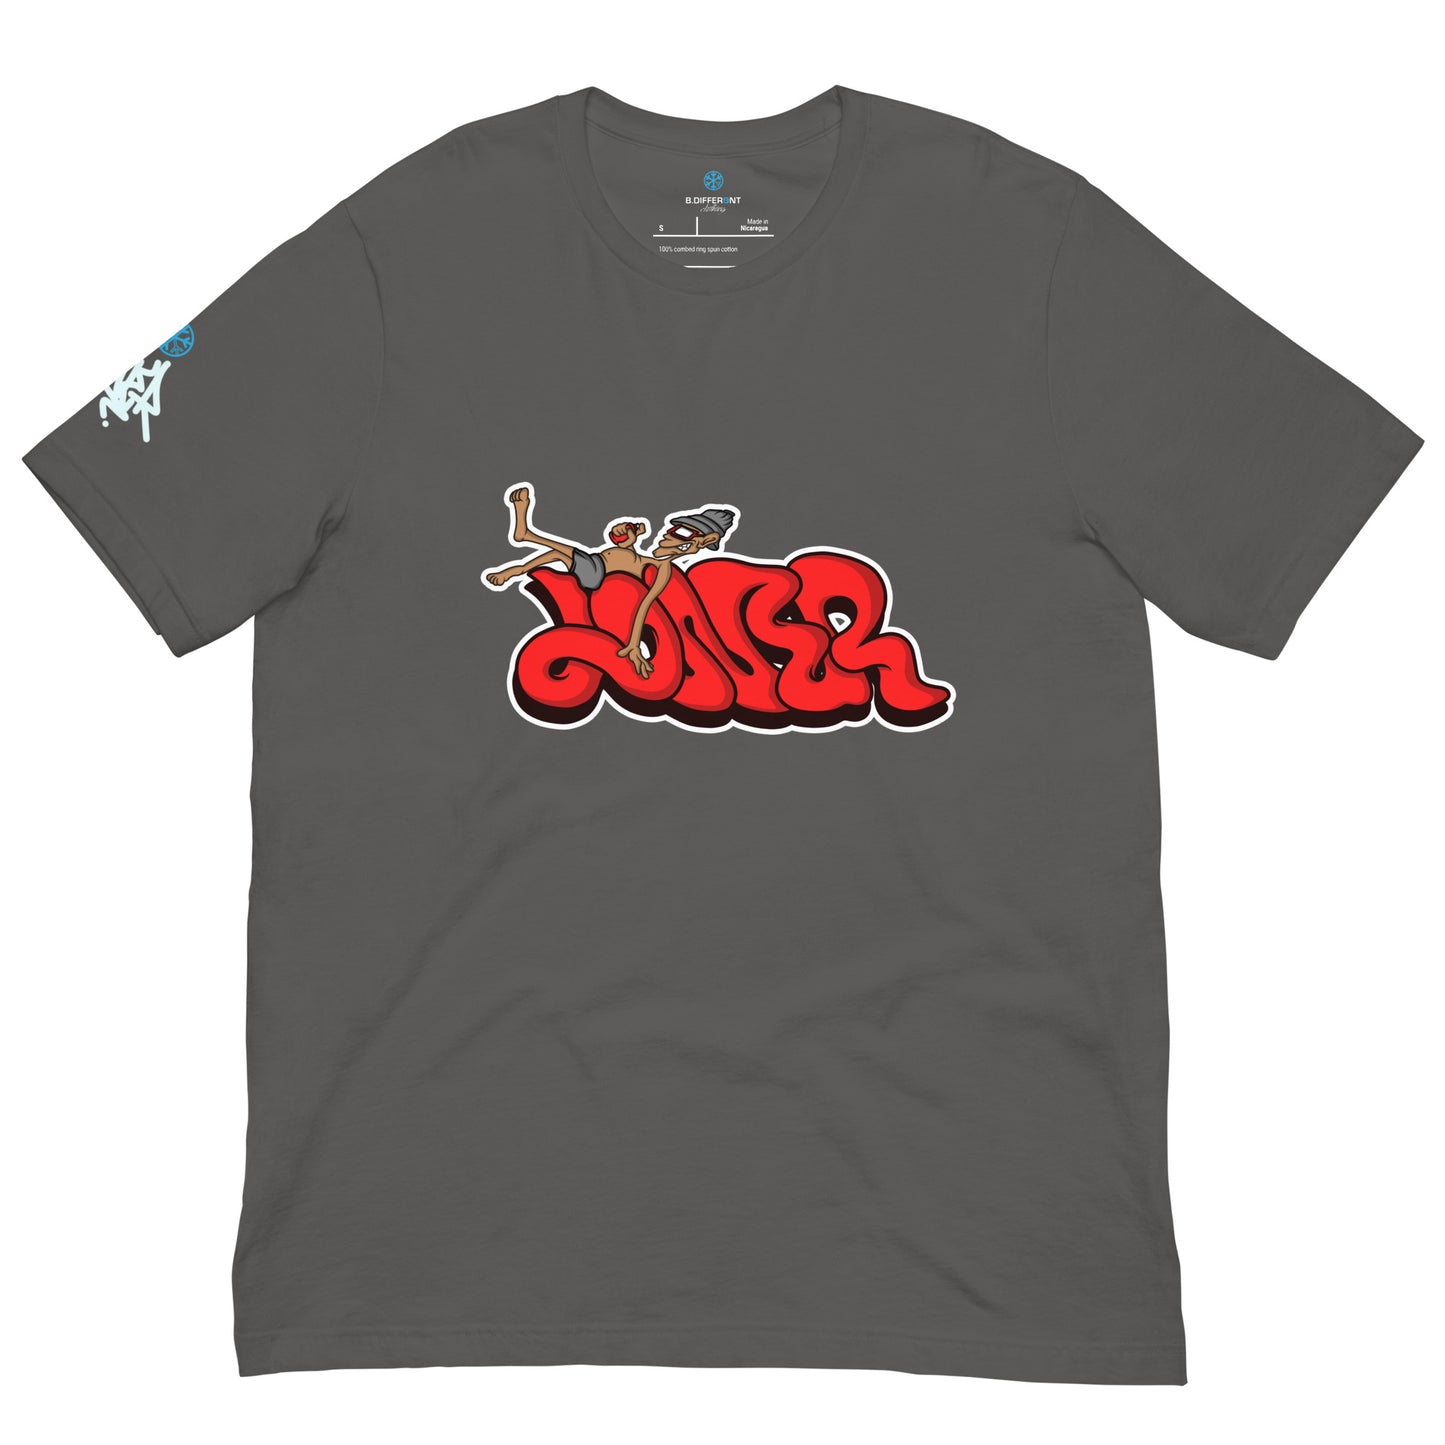 Loner tee gray by B.Different Clothing street art graffiti inspired streetwear brand for weirdos, outsiders, and misfits.